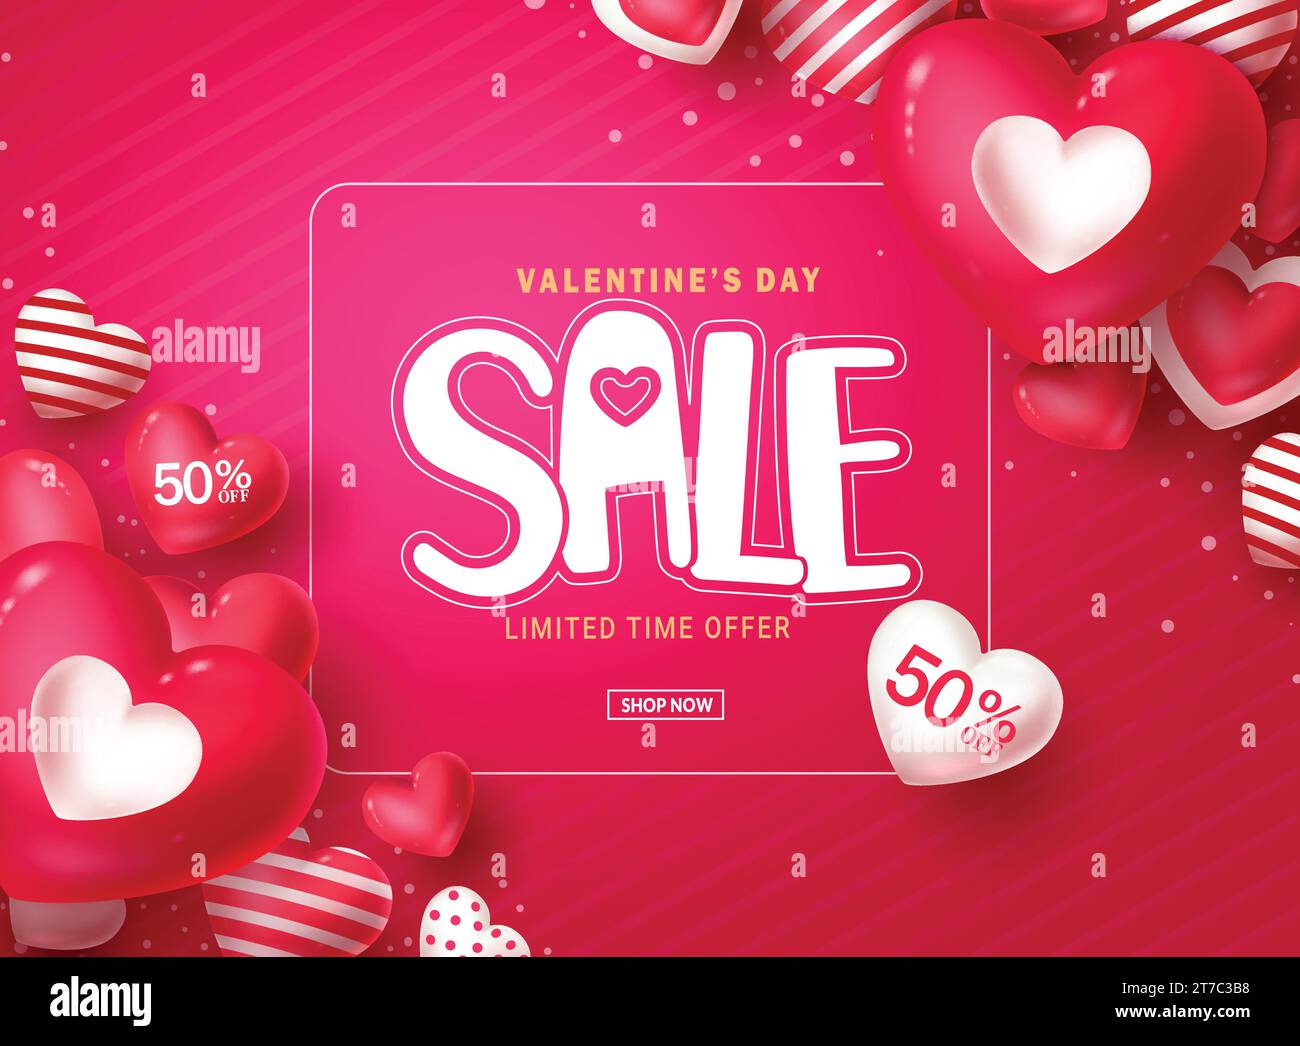 Valentine's day sale text vector banner. Happy valentine's day limited time offer with heart balloons decoration elements. Vector illustration hearts Stock Vector